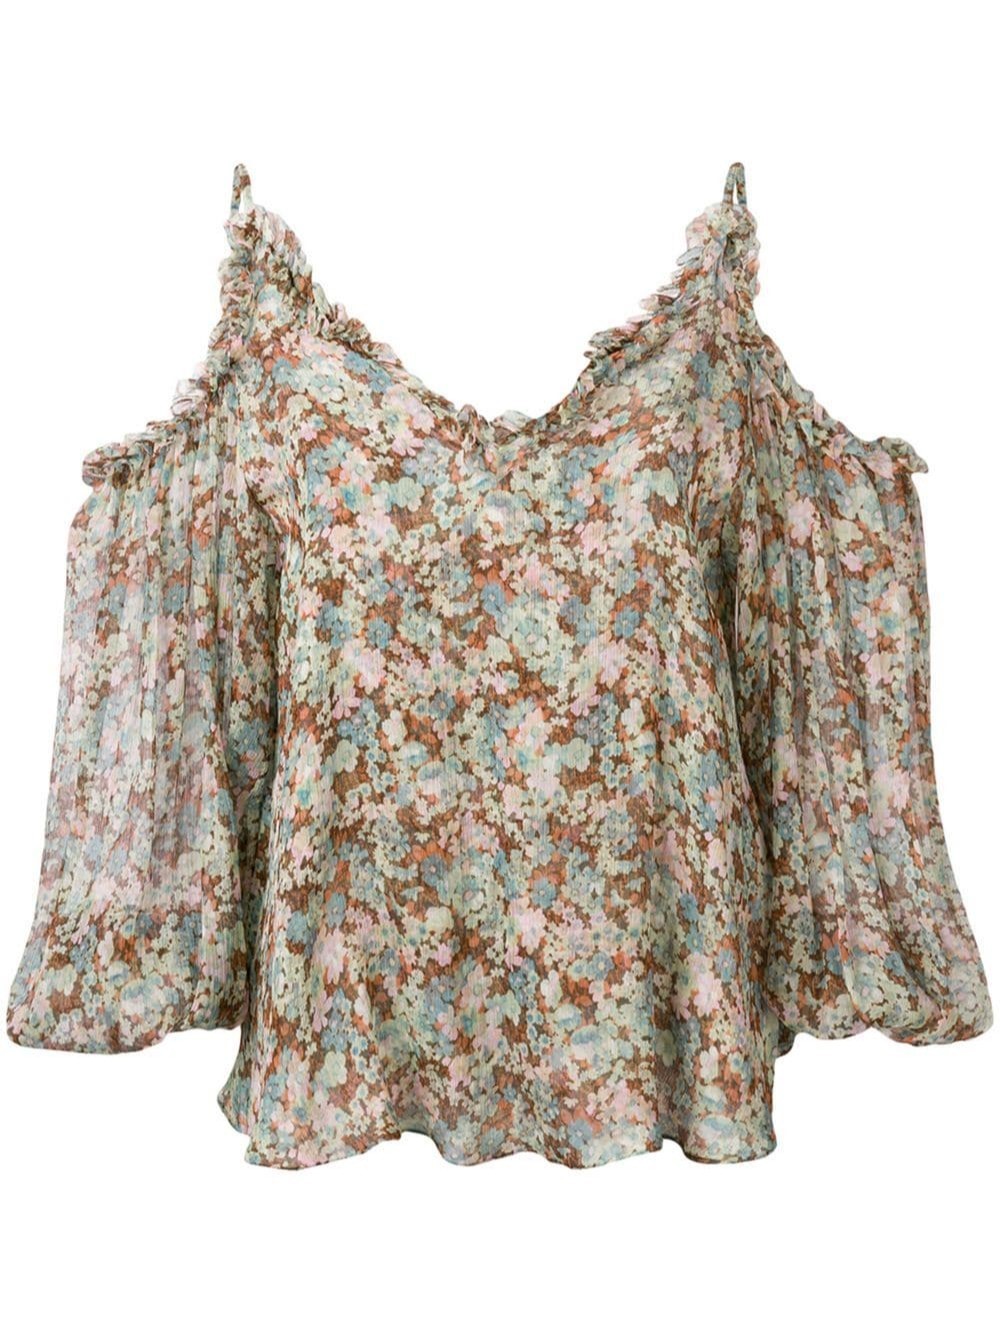 stella mccartney FLORAL TOP available on montiboutique.com - 27657